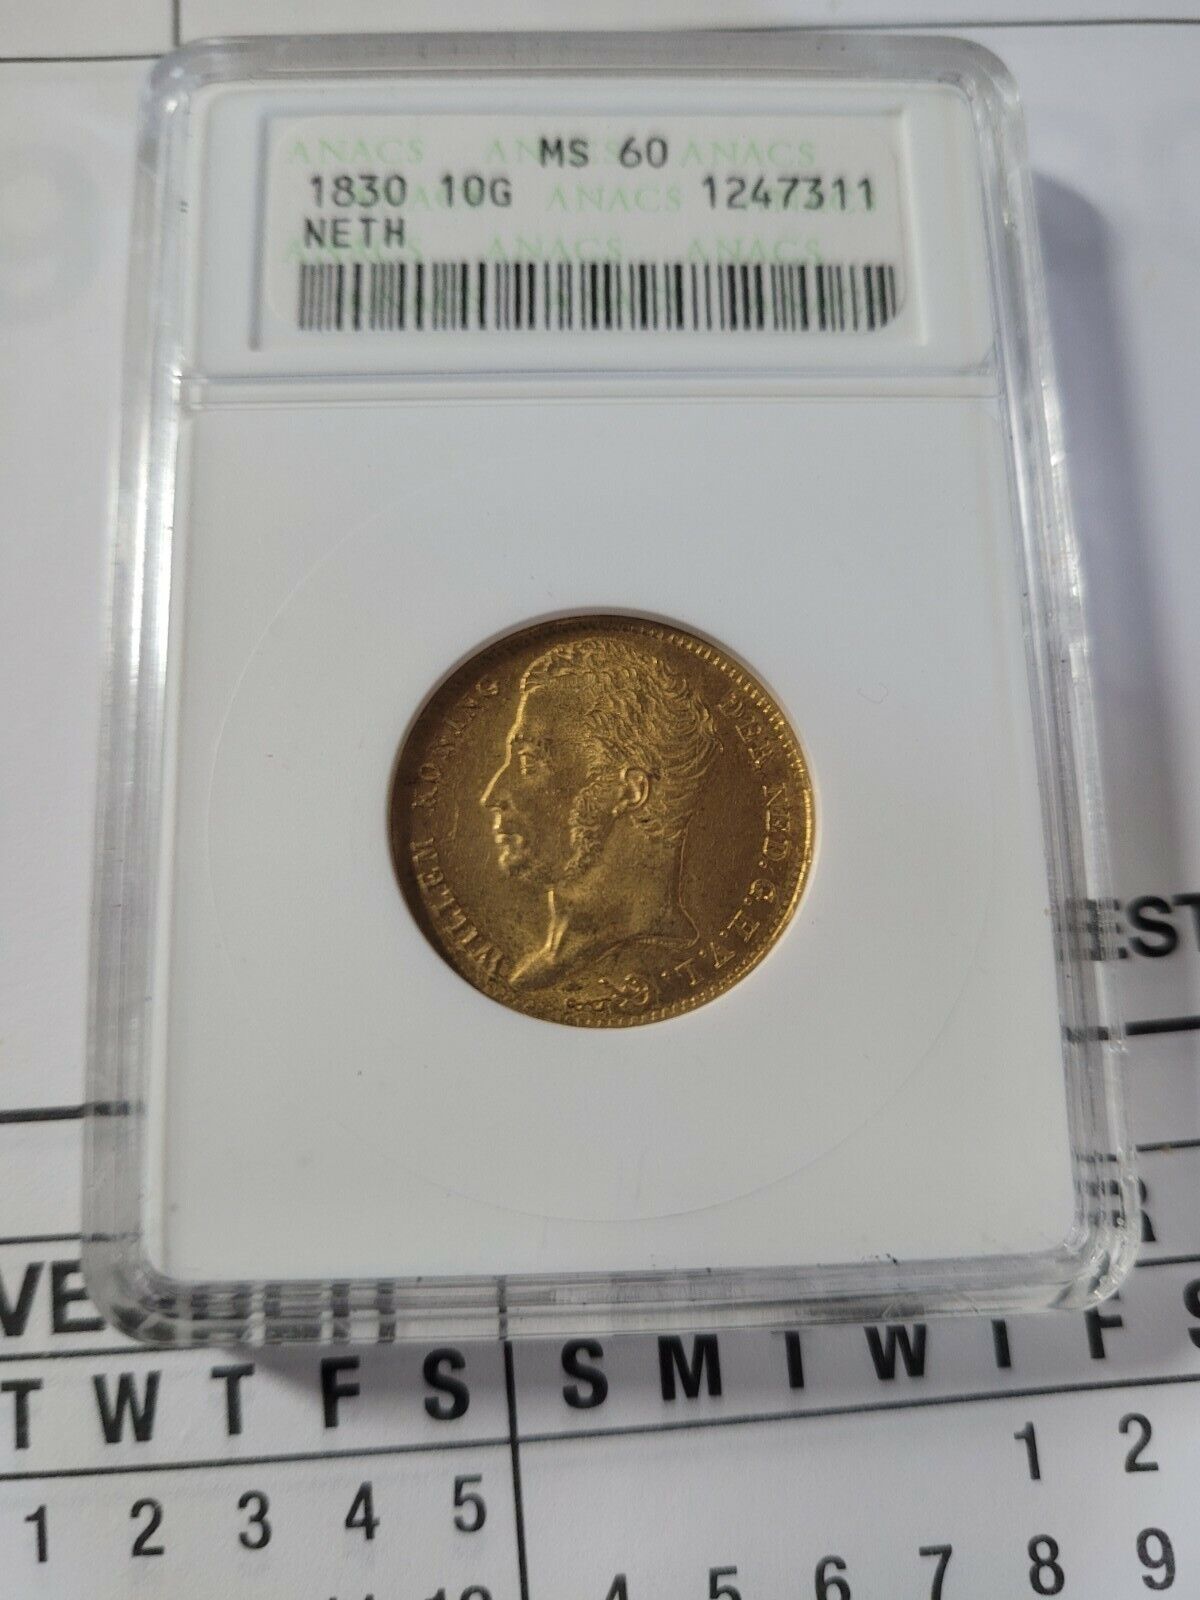 1830 Netherlands 卸直営 10 Guilden ANACS MS GOLD 60 COIN 低価格